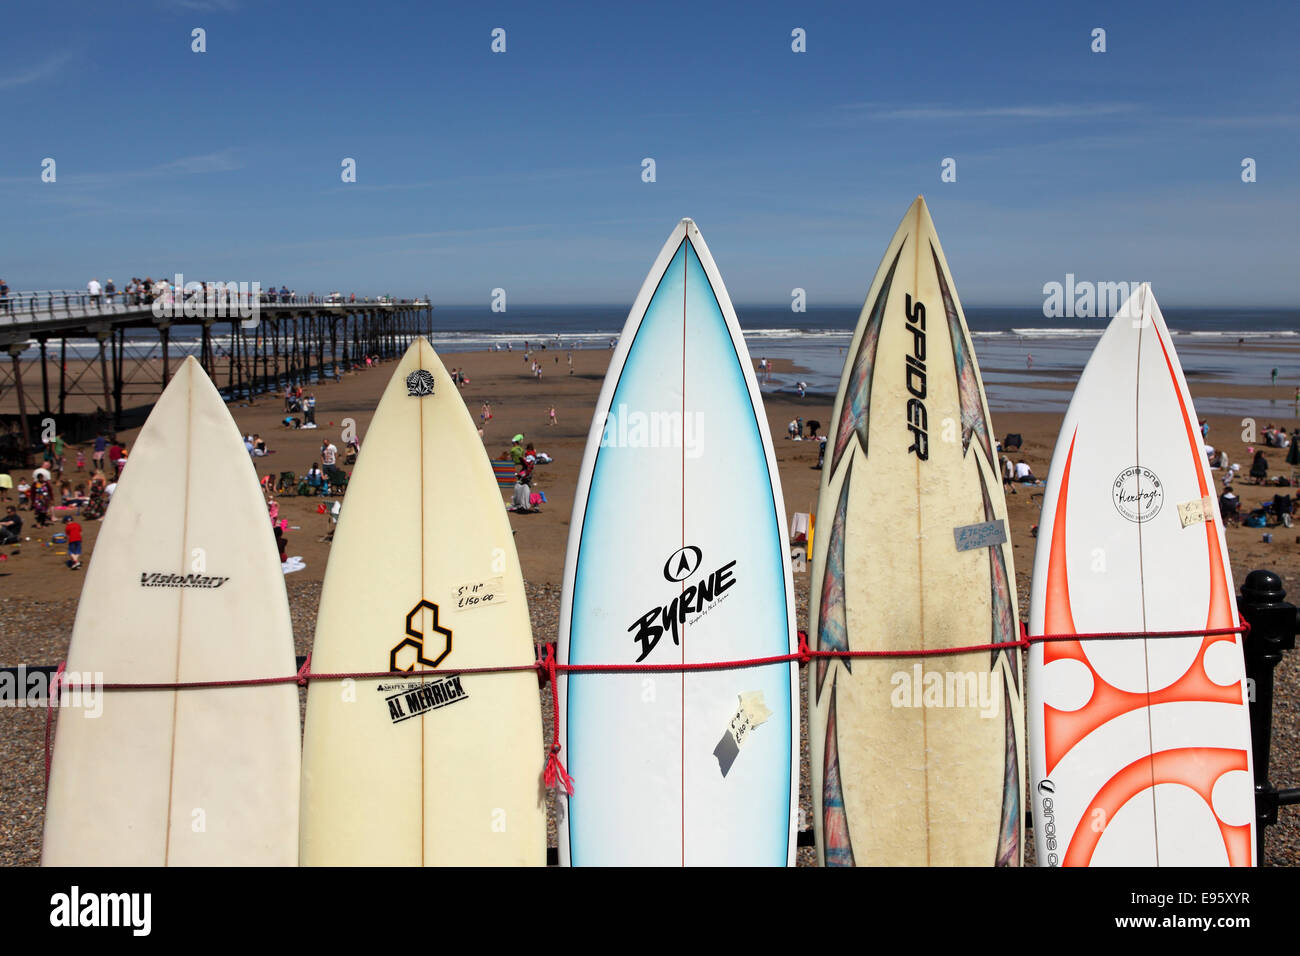 Surfboards on the promenade of Saltburn-by-the-Sea, United Kingdom. Stock Photo